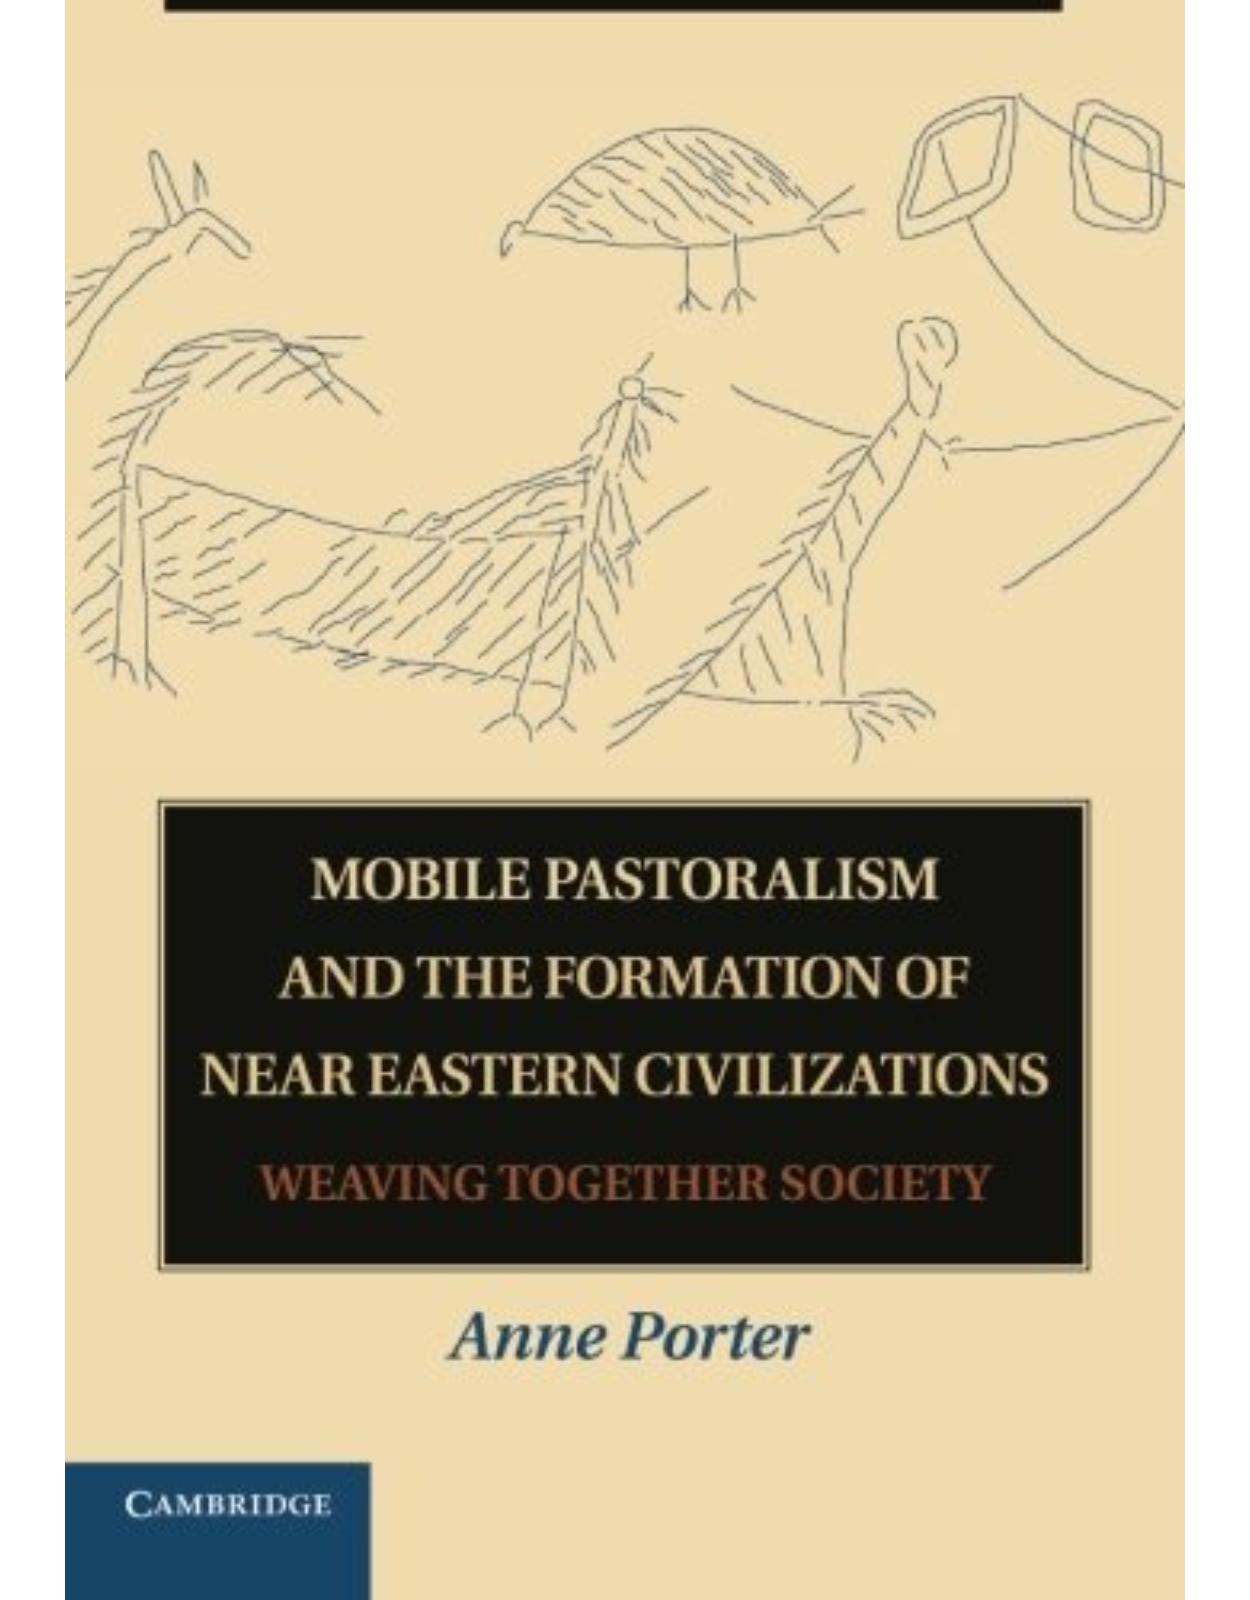 Mobile Pastoralism and the Formation of Near Eastern Civilizations: Weaving Together Society